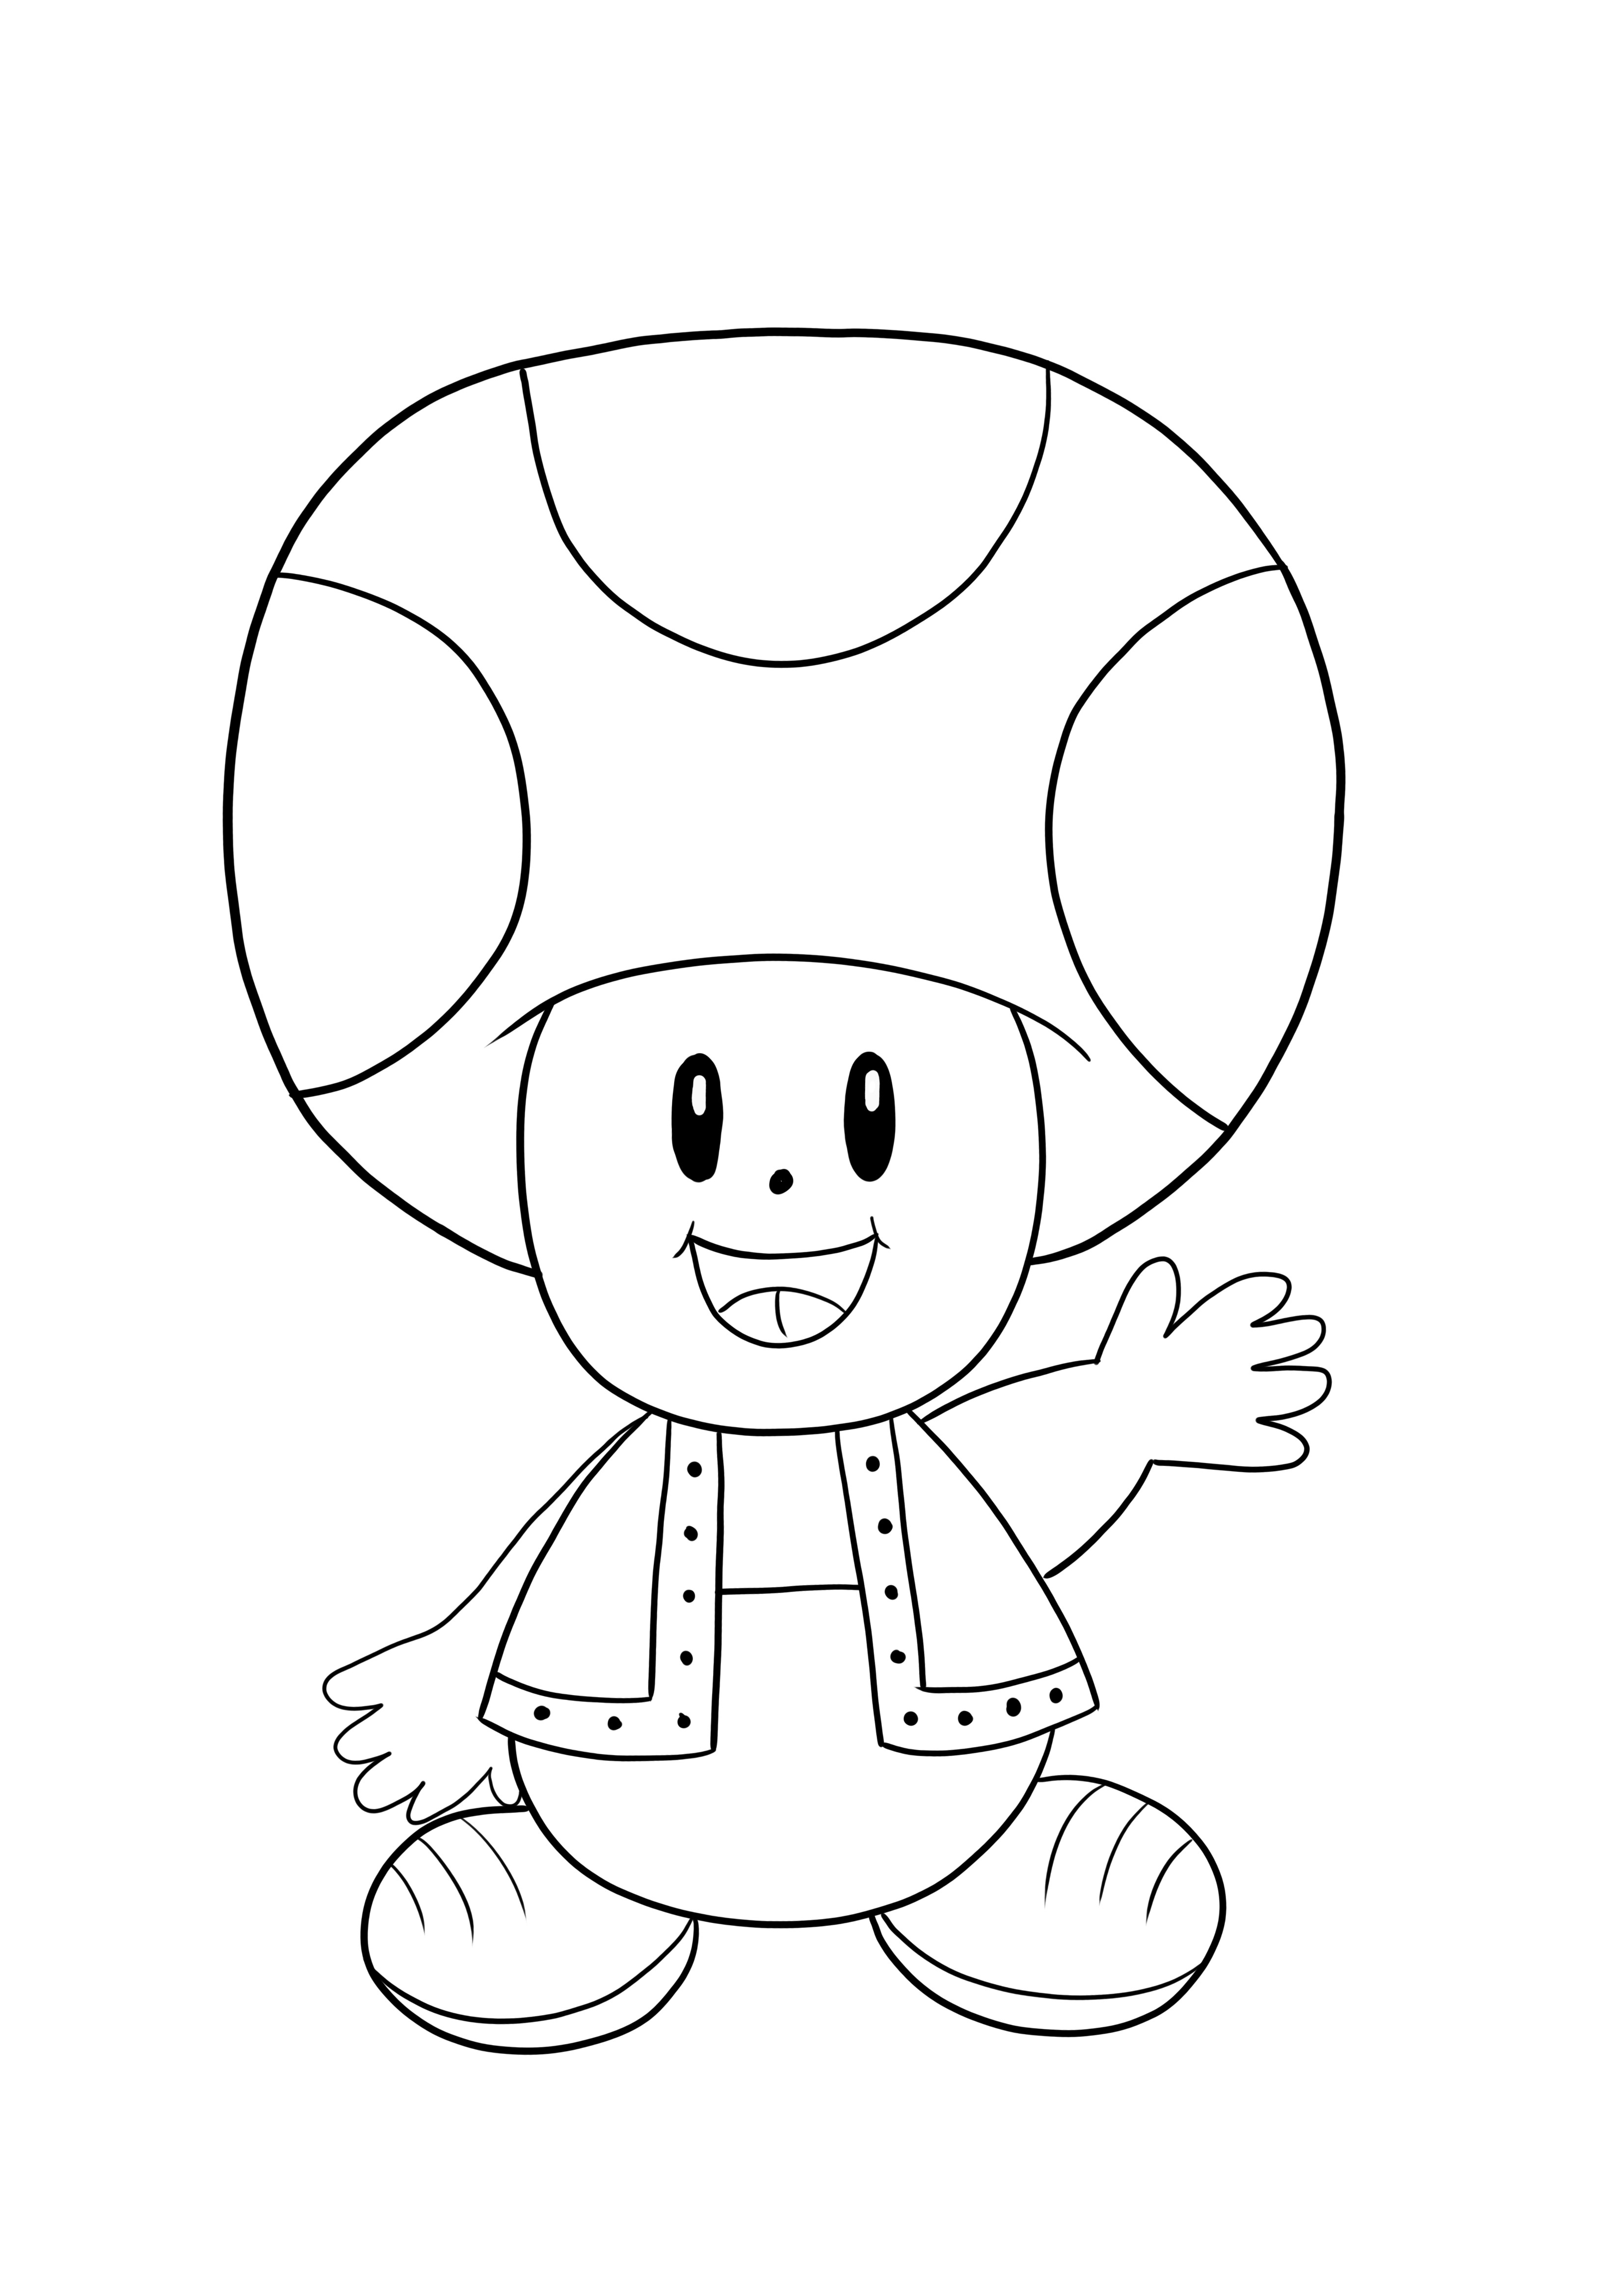 Toad from Super Mario video game to print and color for free